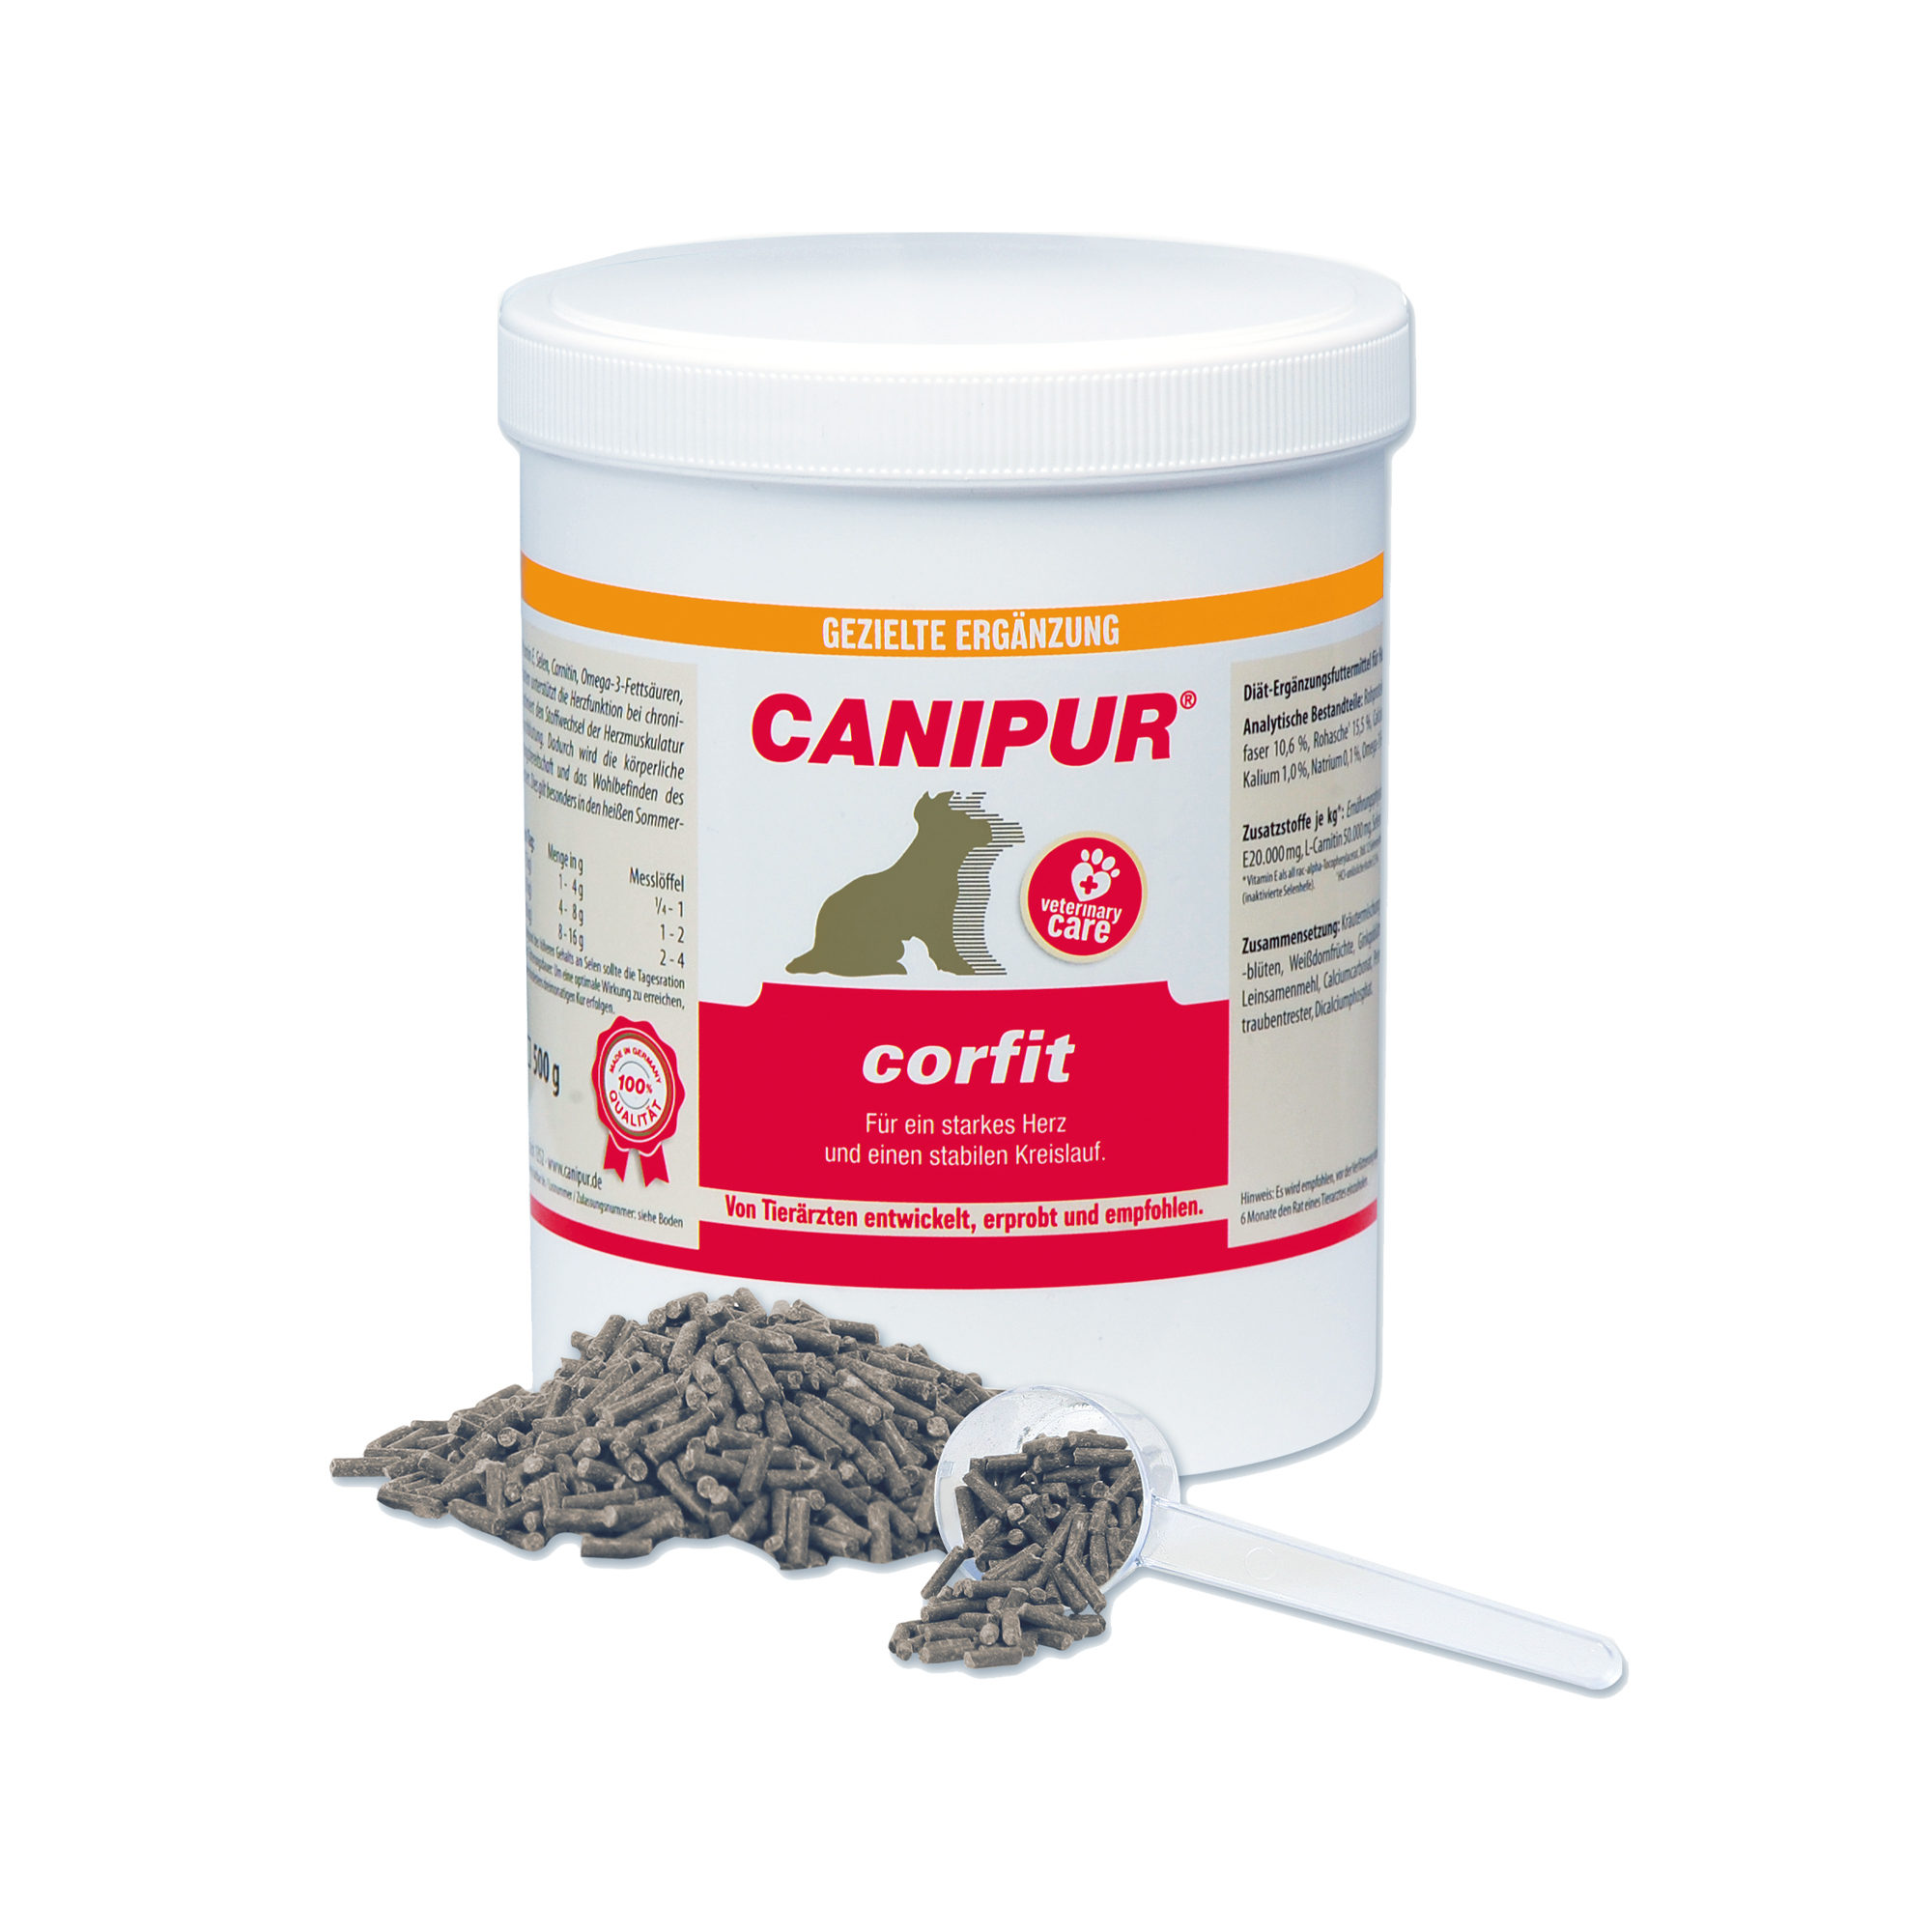 Canipur Corfit 500 g